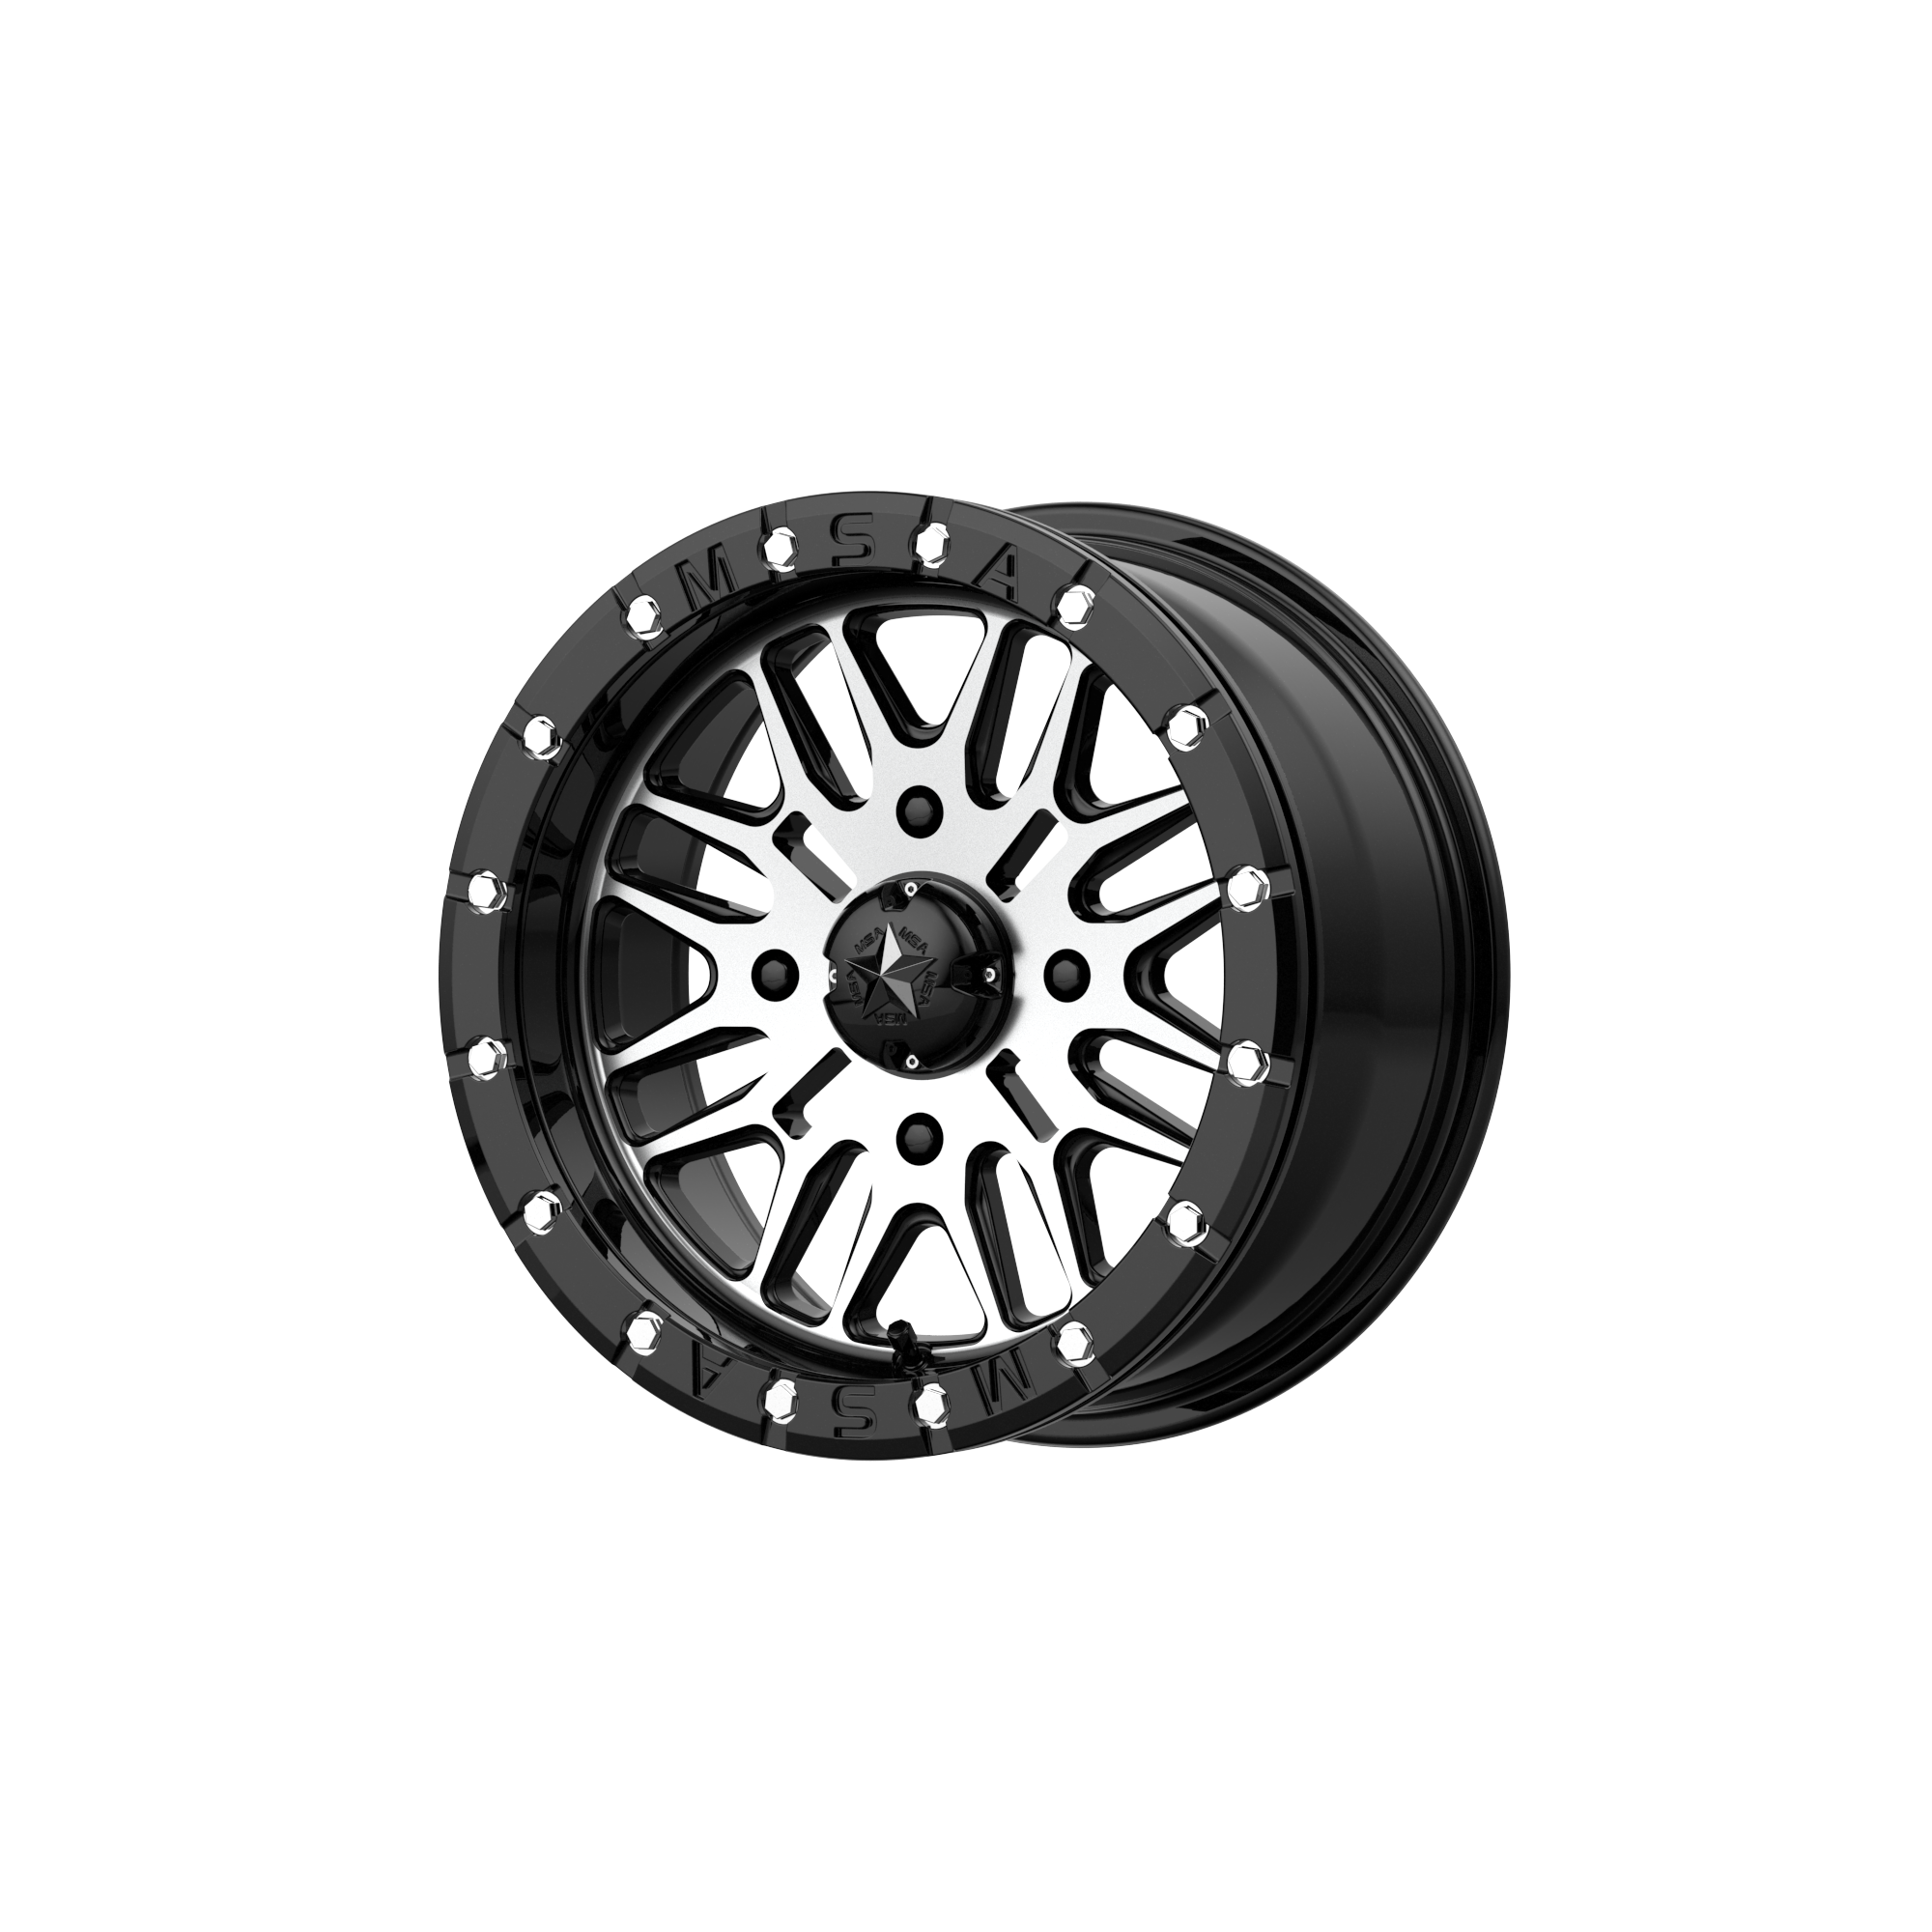 BRUTE BEADLOCK 14x7 4x110.00 GLOSS BLACK MACHINED (10 mm) - Tires and Engine Performance